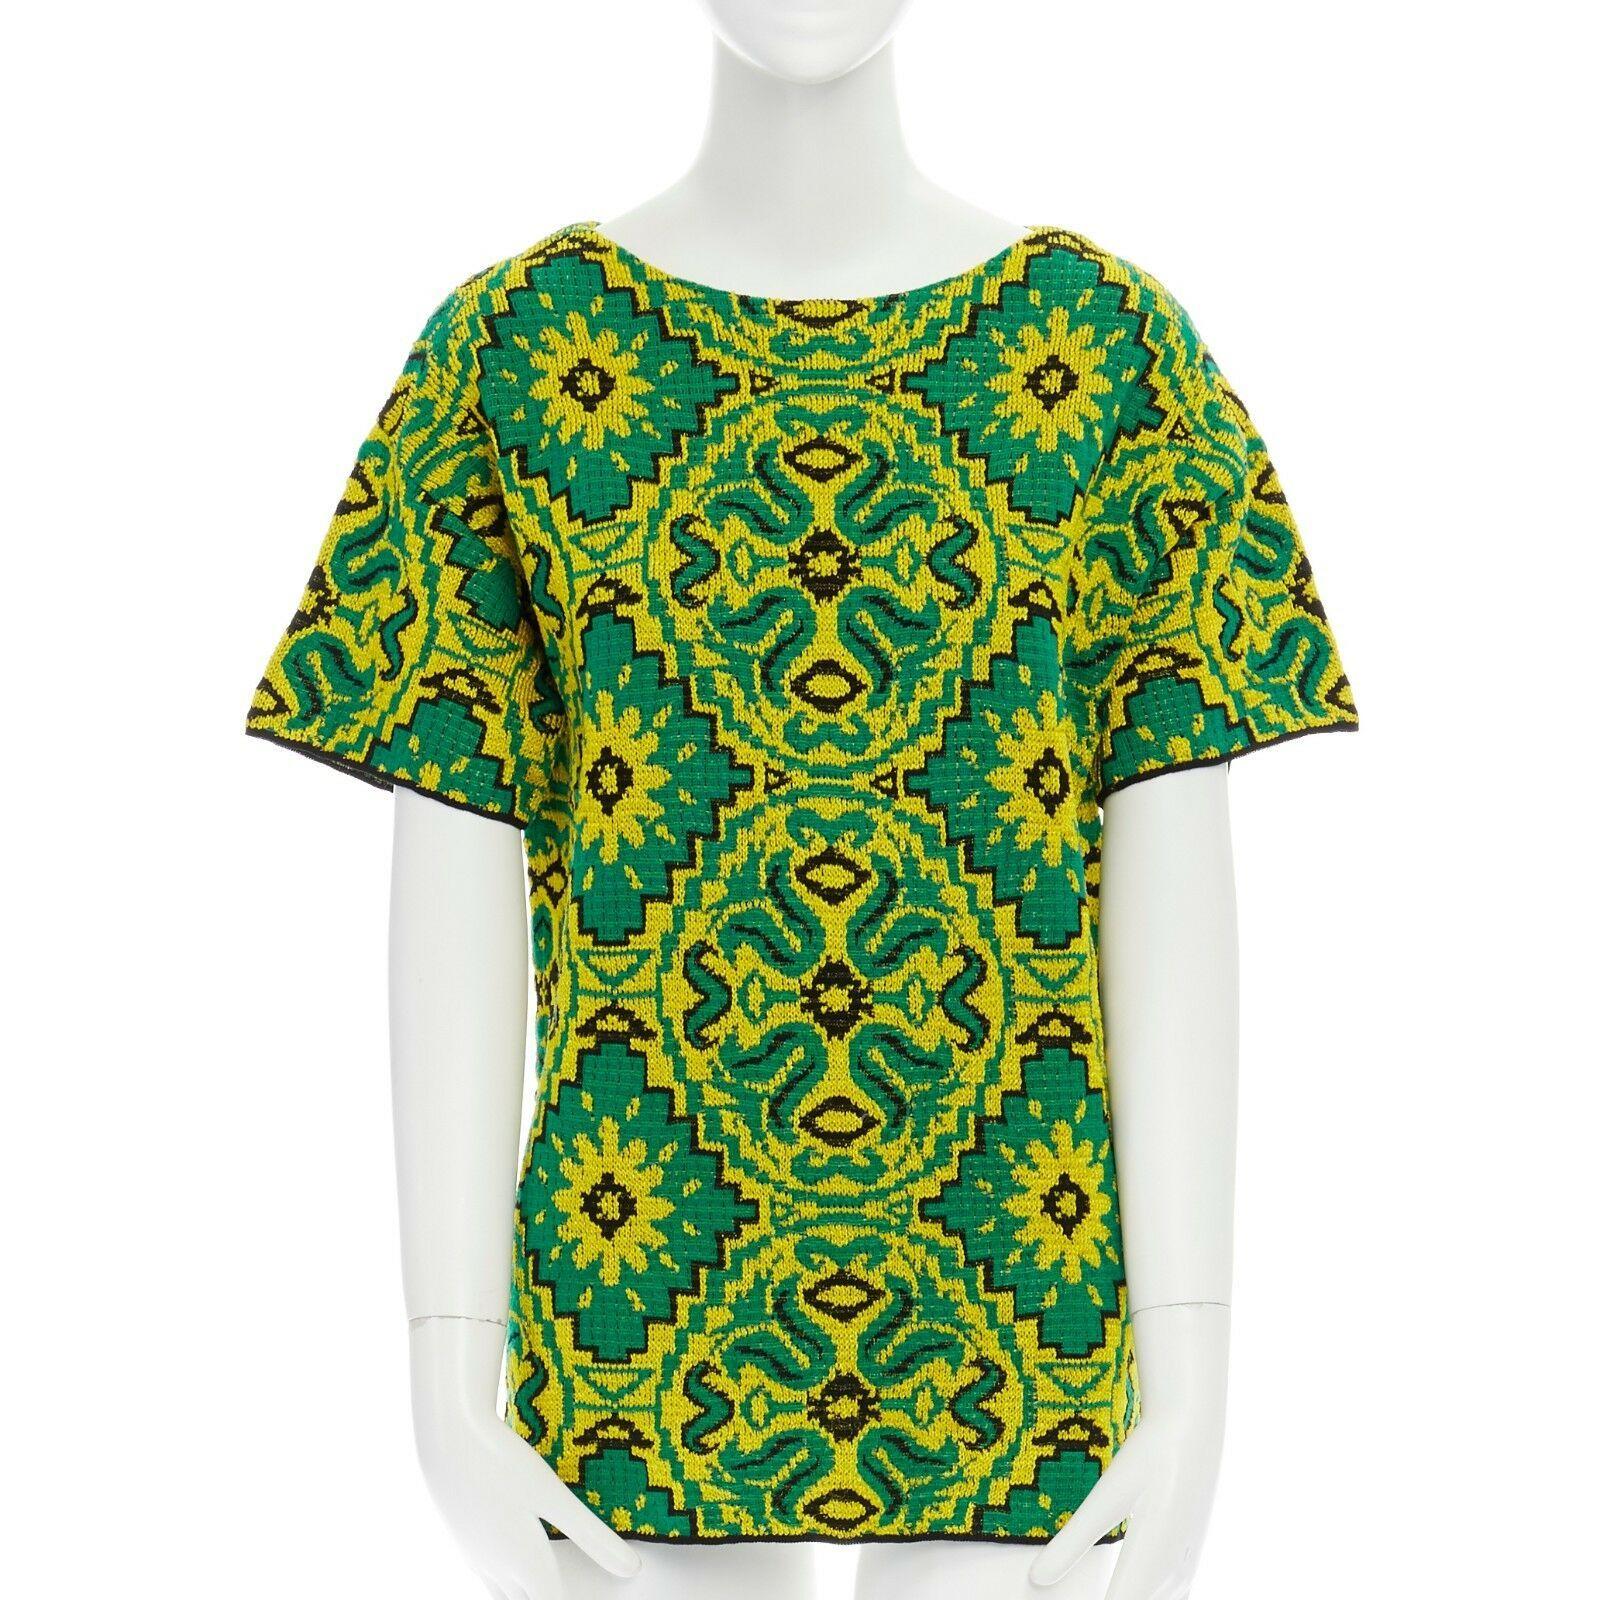 DRIES VAN NOTEN green yellow ethnic oriental floral jacquard knit boxy top XS
DRIES VAN NOTEN
COTTON, POLYESTER . 
GREEN, YELLOW, BLACK . 
JACQUARD TEXTURED KNIT. 
BOHO ETHNIC FLORAL PATTTERN . 
BOXY FIT . 
DROPPED SHOULDER . 
SHORT SLEEVES . 
WIDE